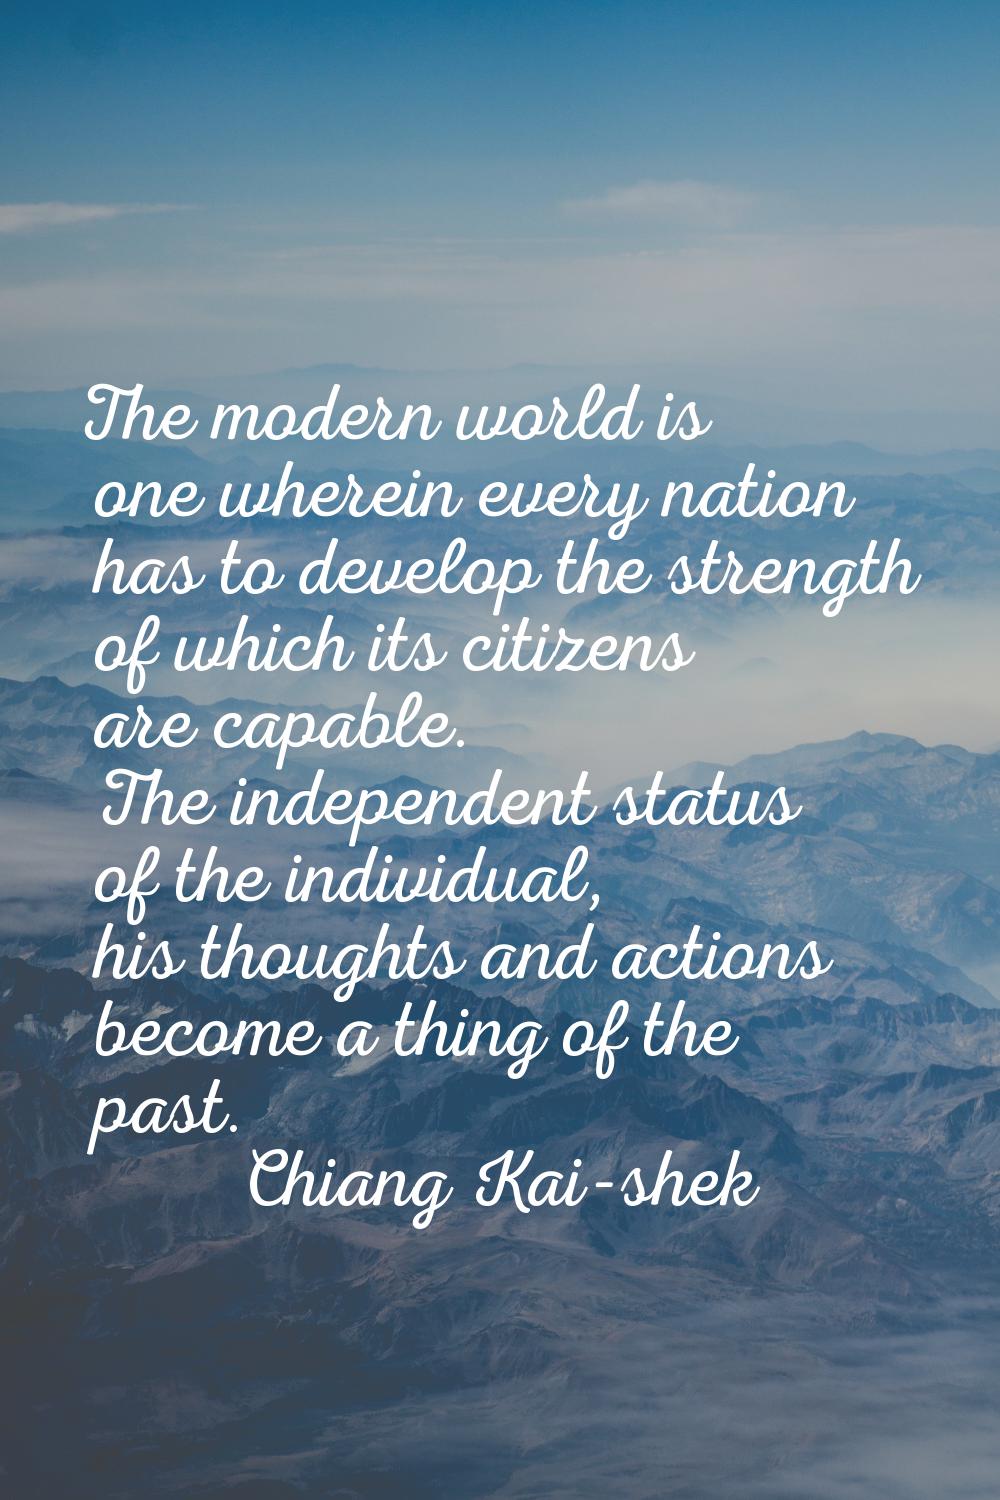 The modern world is one wherein every nation has to develop the strength of which its citizens are 